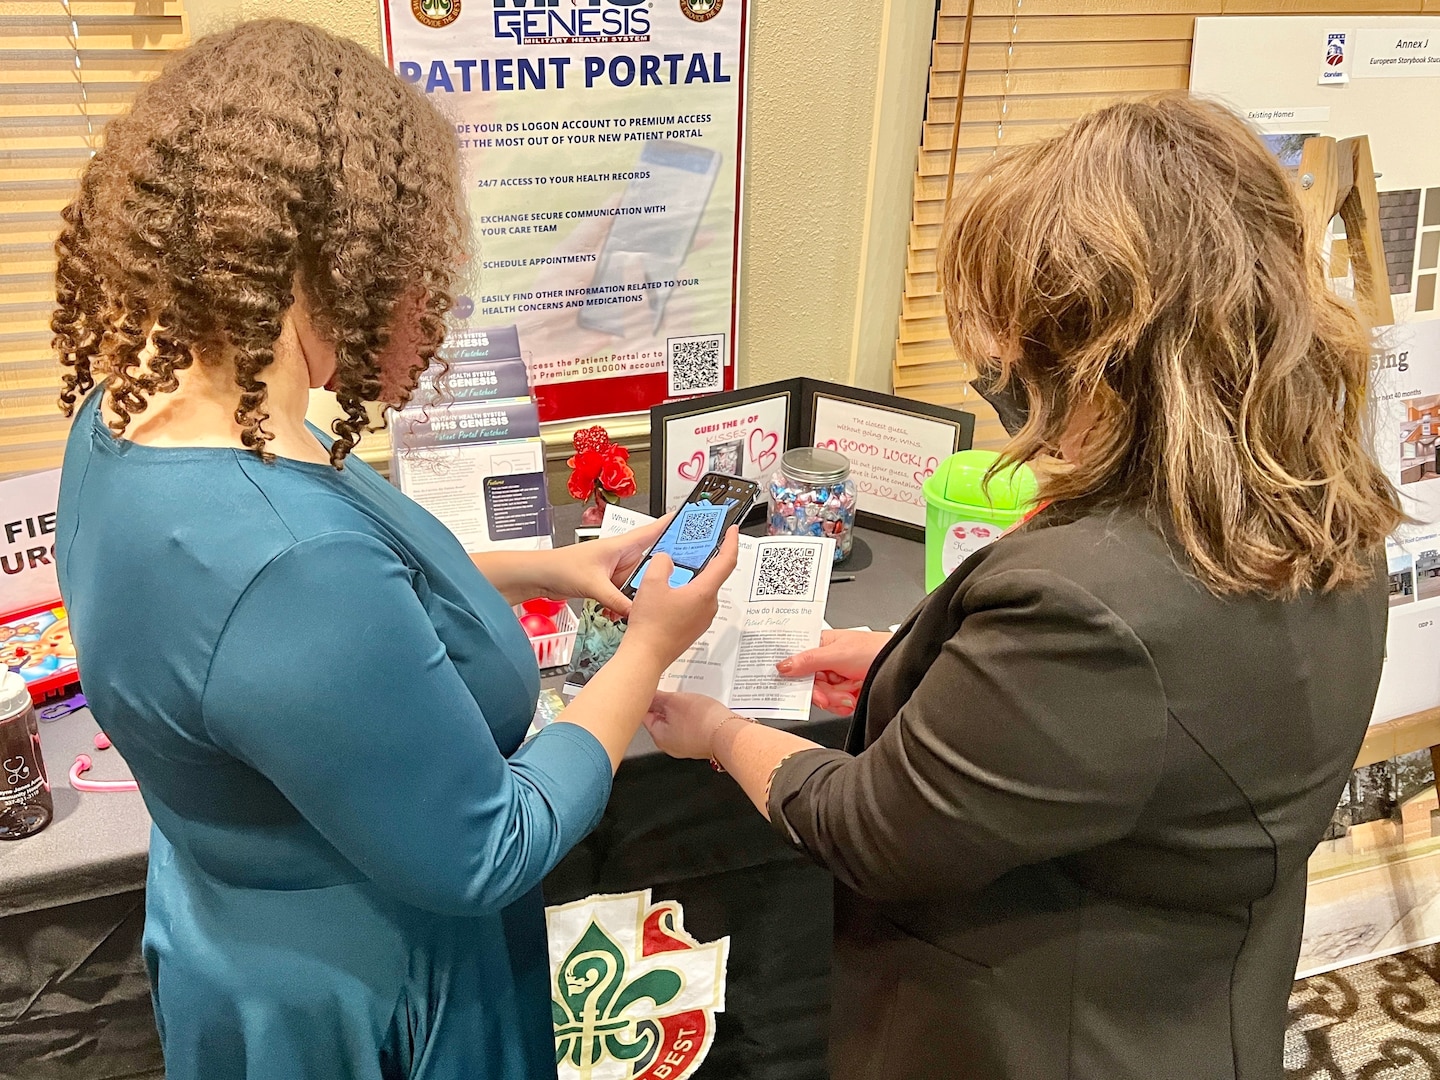 Melissa Box (right), employee of the year for Bayne-Jones Army Community Hospital, explains to Francesca Parent (left) how to register for a free premium access account to the MHS GENESIS Patient Portal on Feb. 9 at the Joint Readiness Training Center and Fort Polk Quality of Life conference.